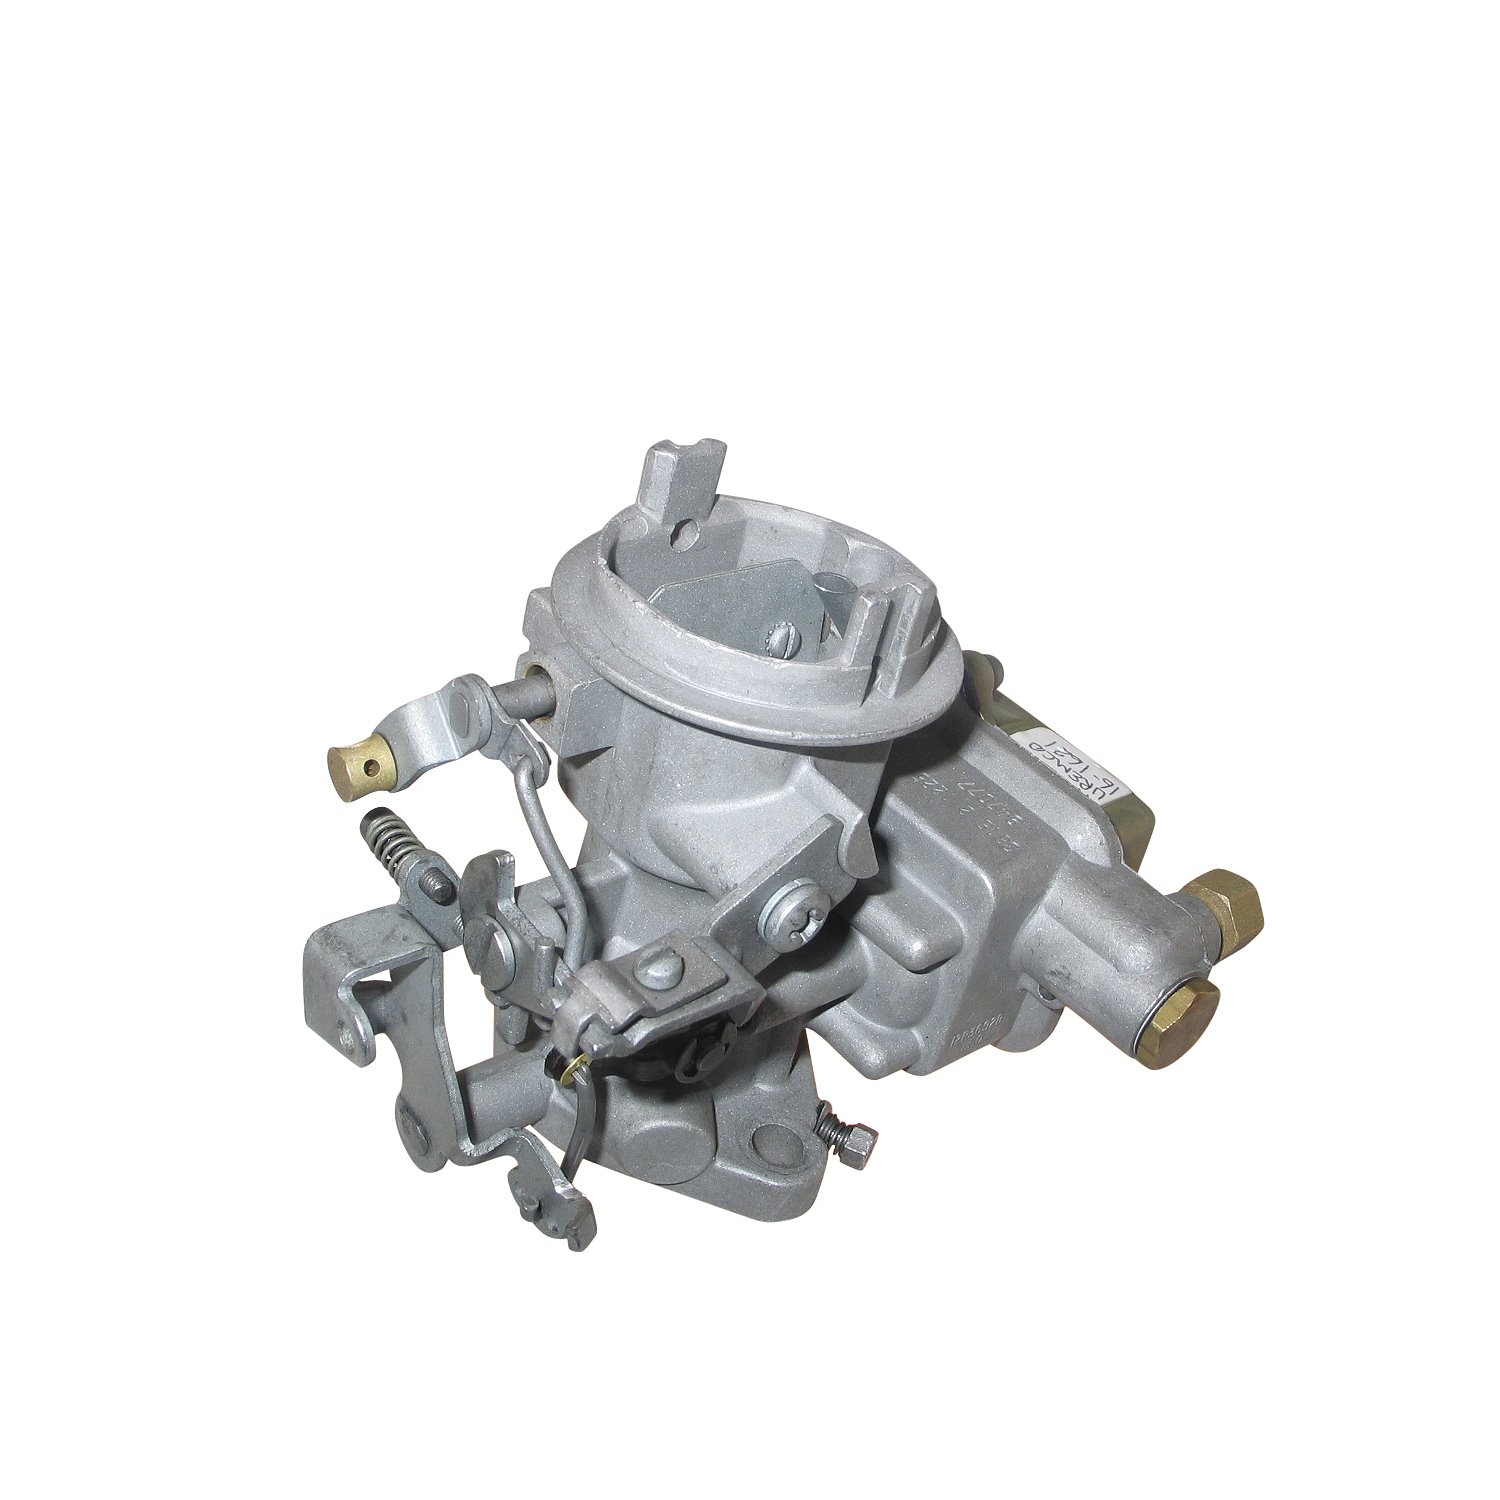 16-1620 Holley Remanufactured Carburetor, 1920-Style